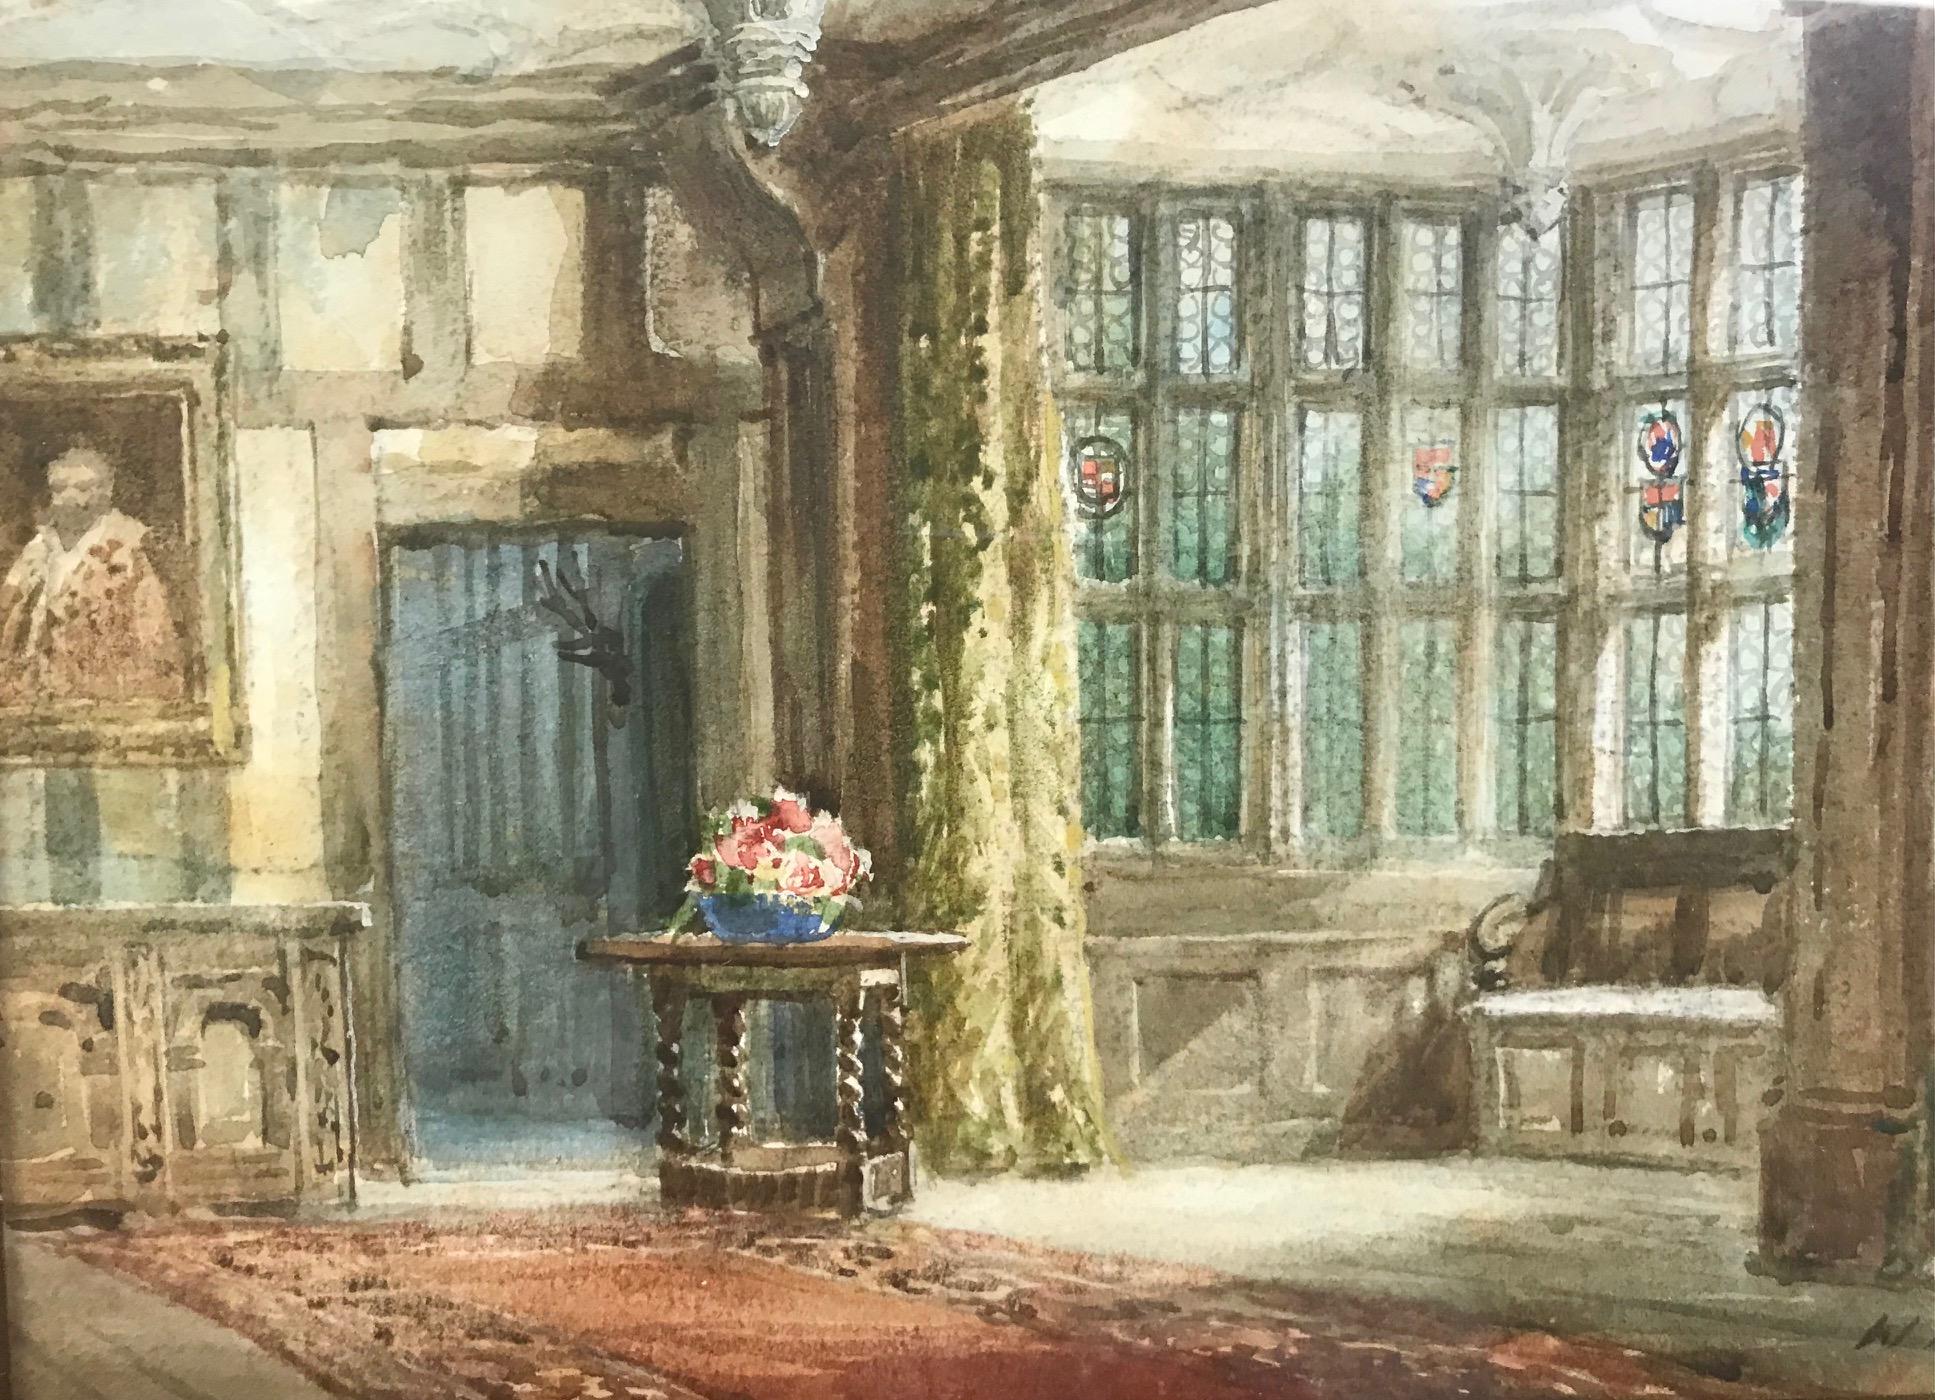 Bramall Hall - Painting by Walter Henry Sweet